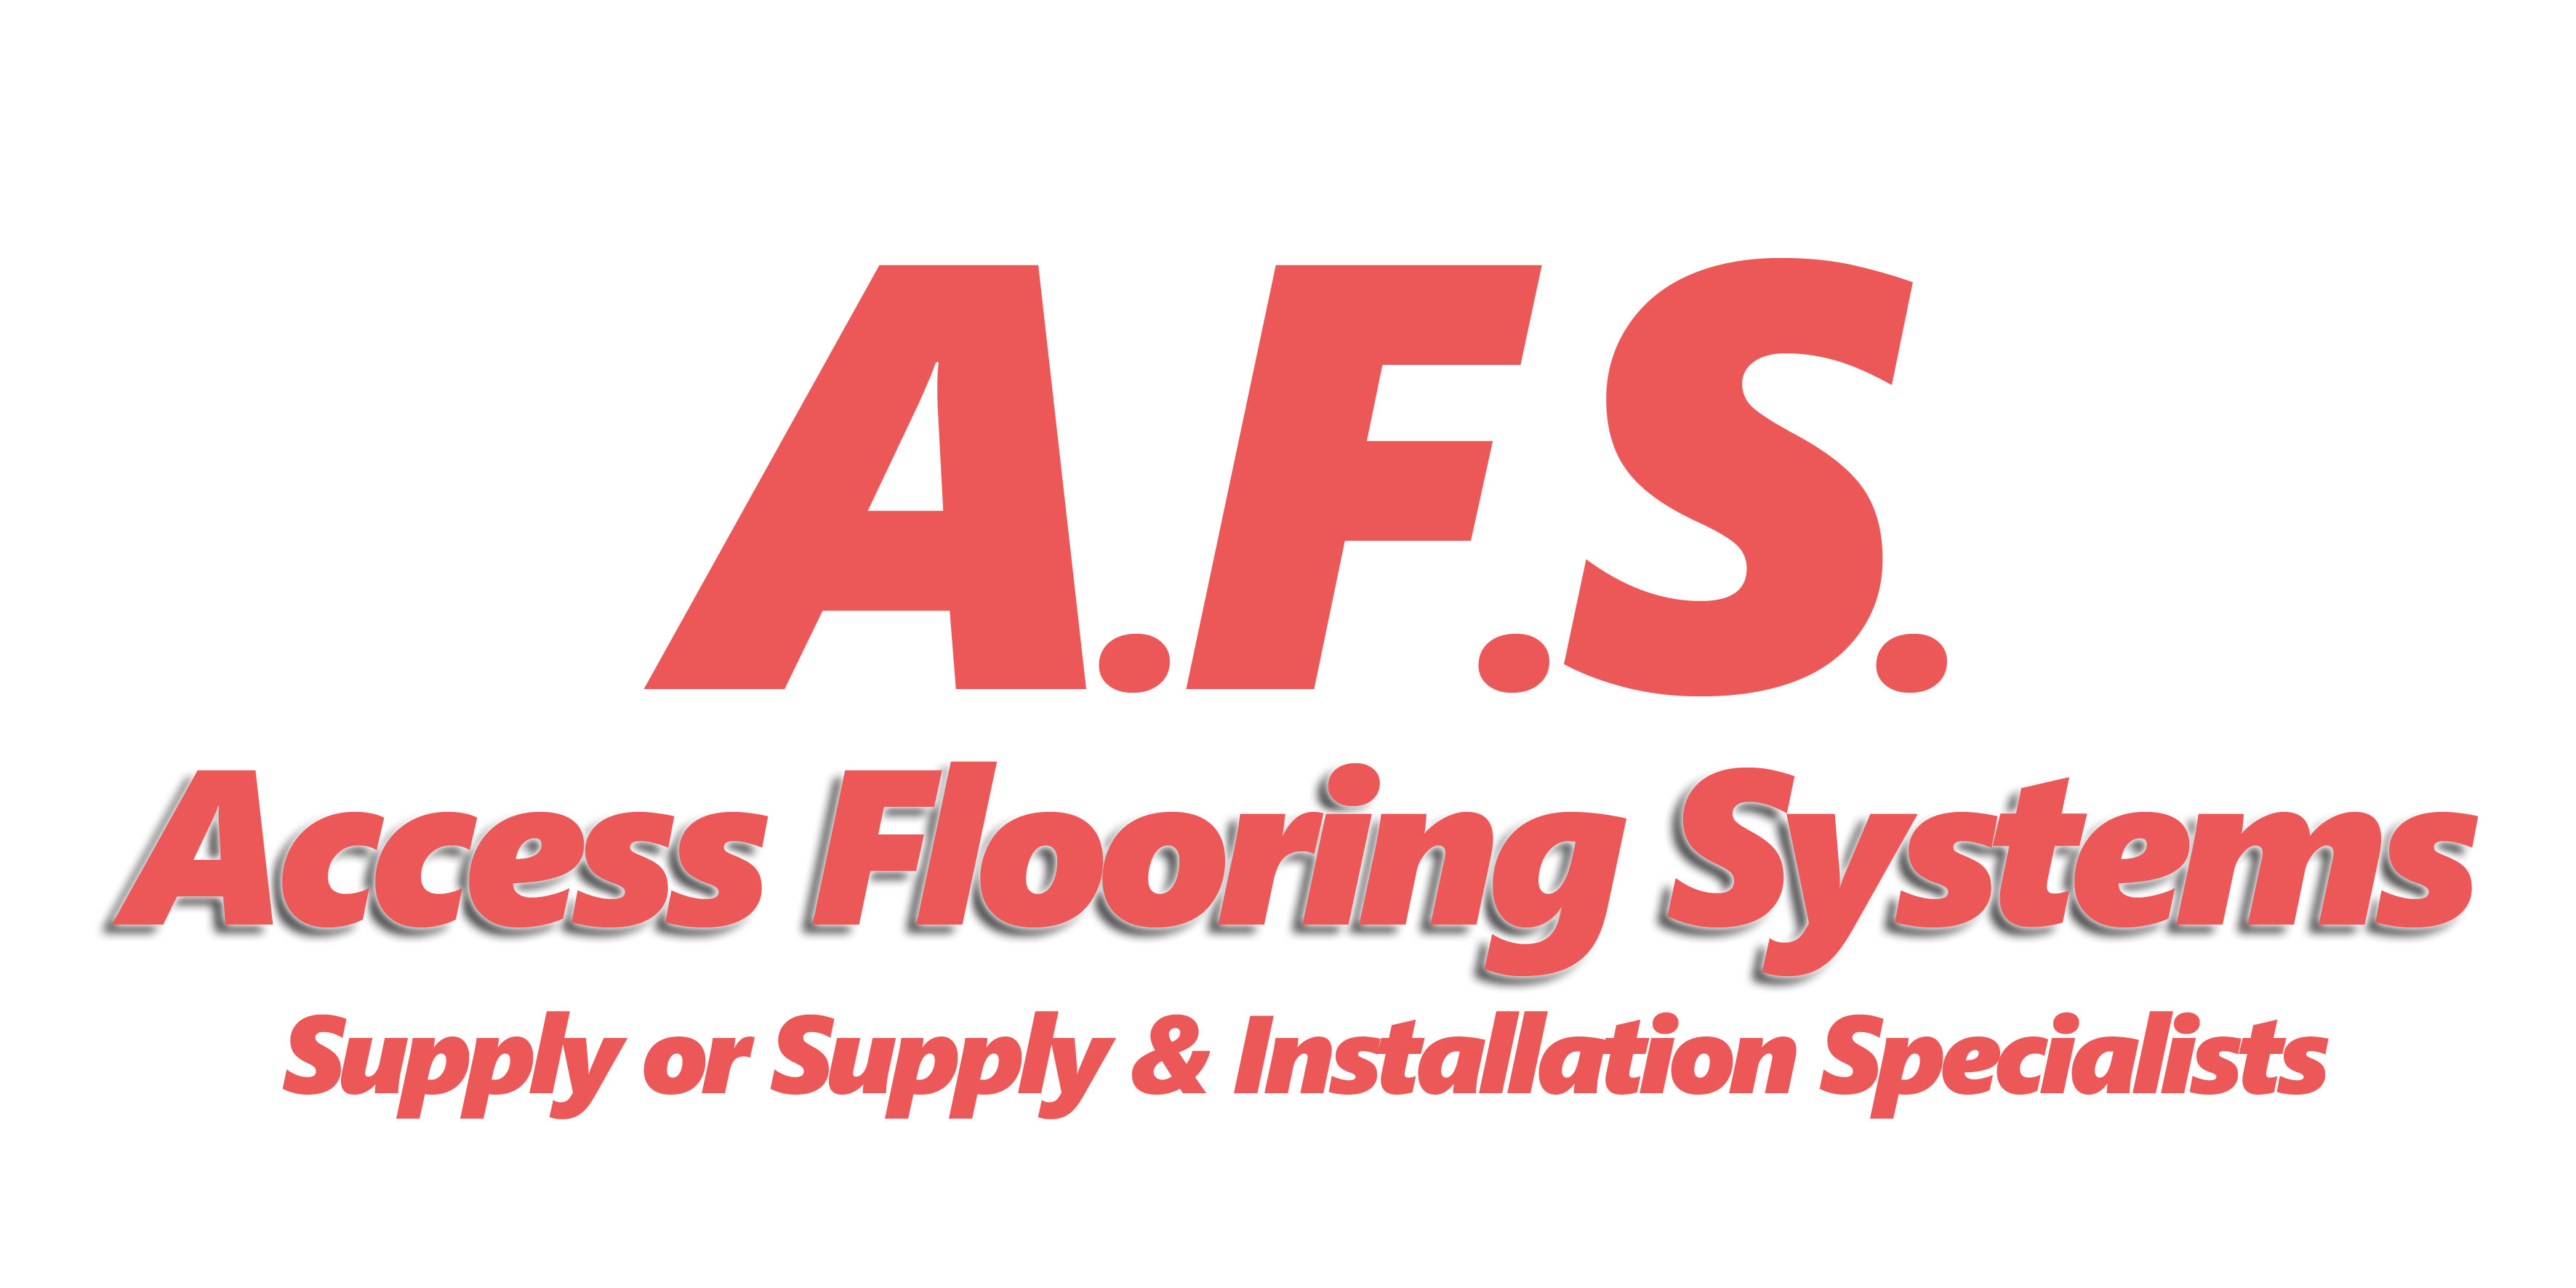 Access Flooring Systems